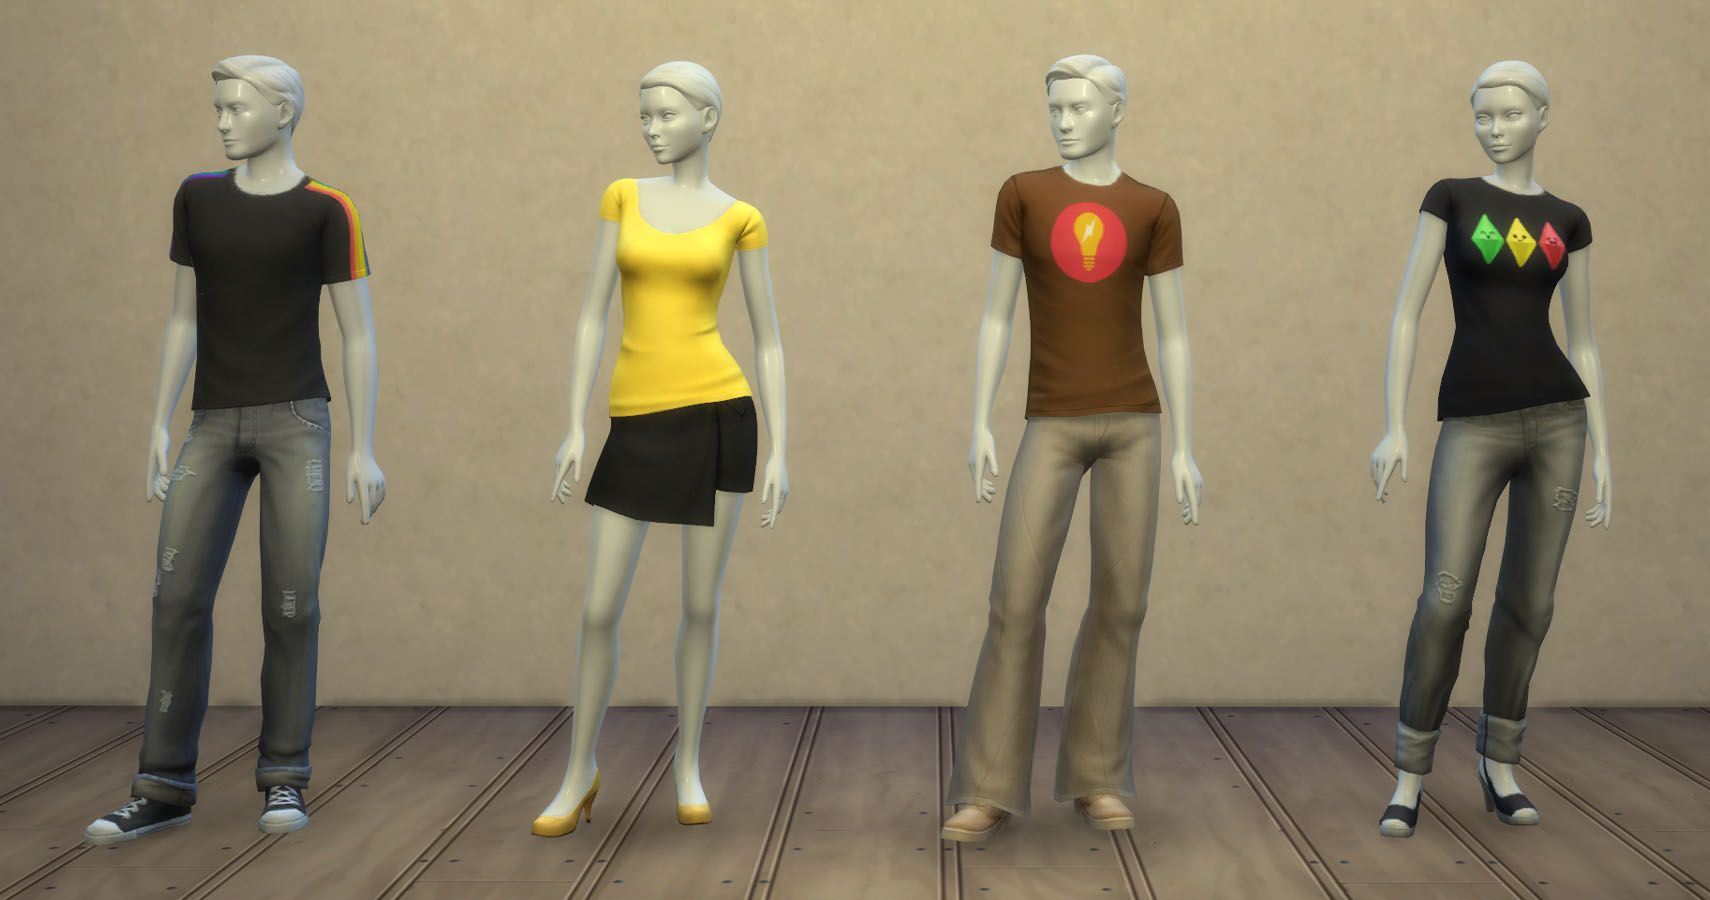 The Sims 4: The Best Items You Can Only Get In Cool Kitchen Stuff